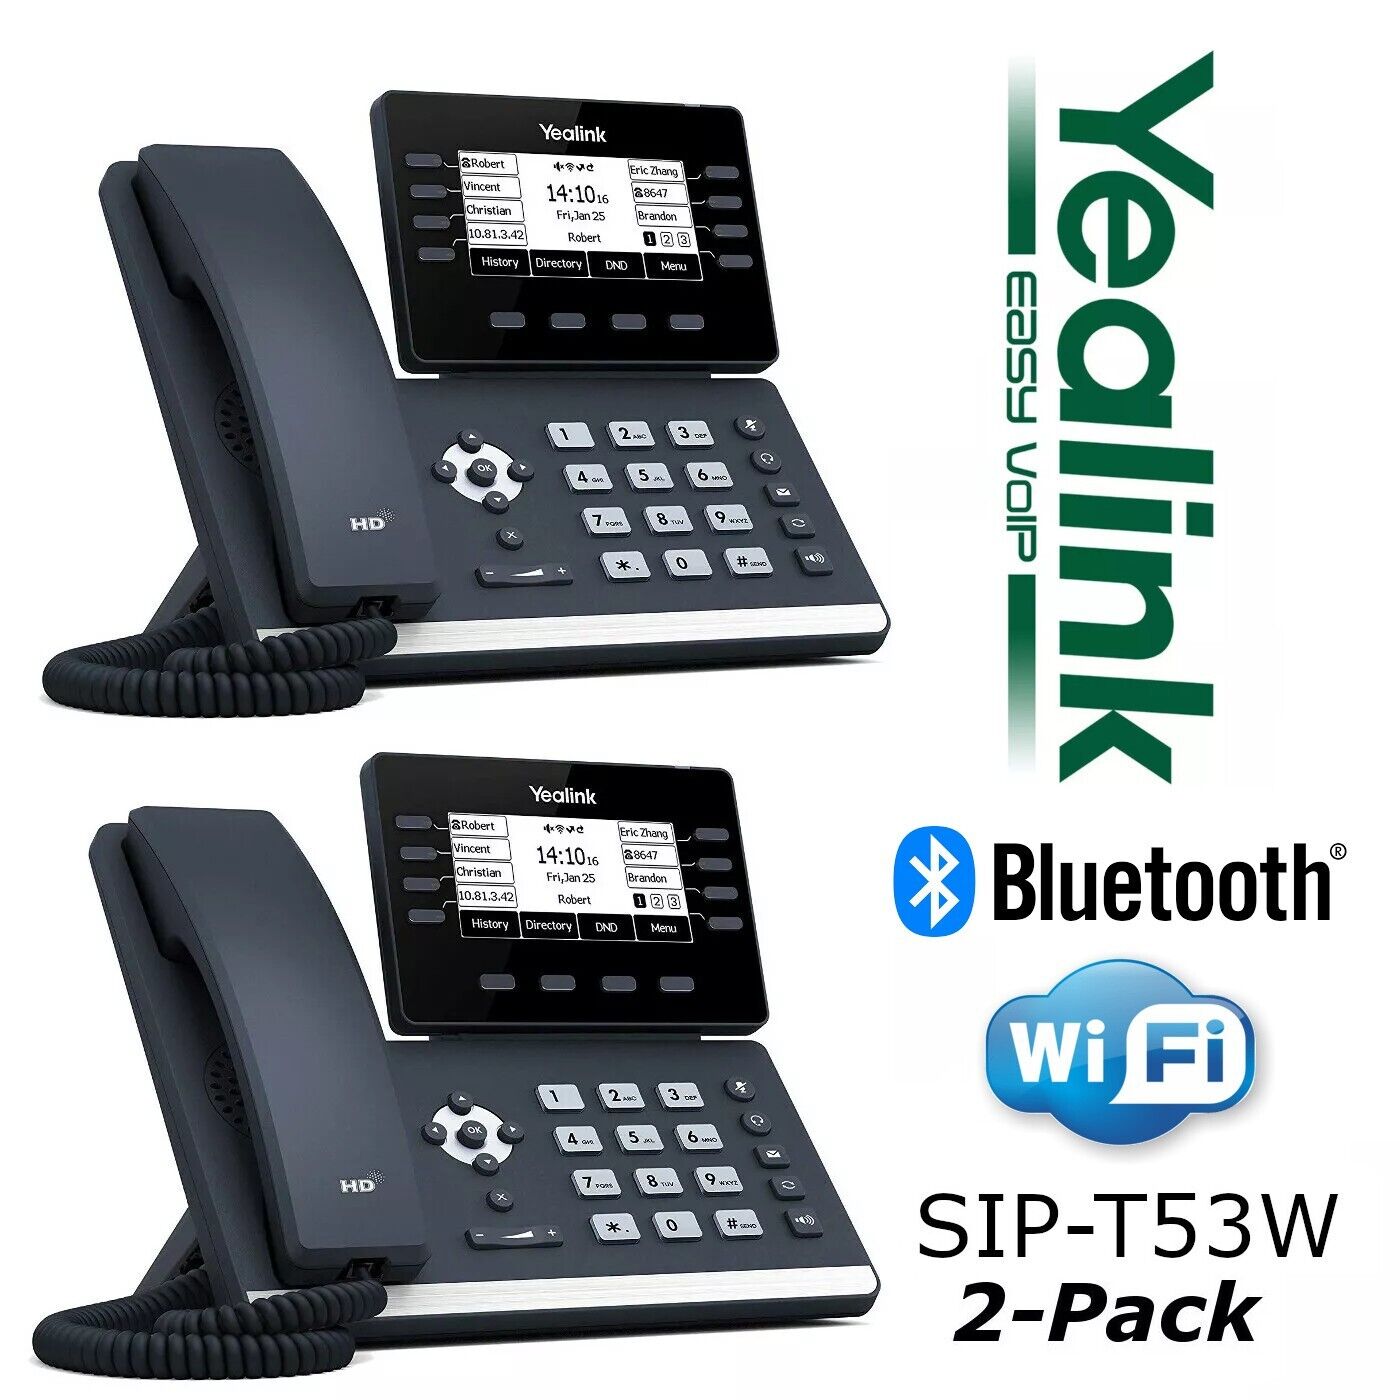 2 Pack Lot Yealink SIP-T53W Prime Business Phone T53W Entry Level Bluetooth WiFi